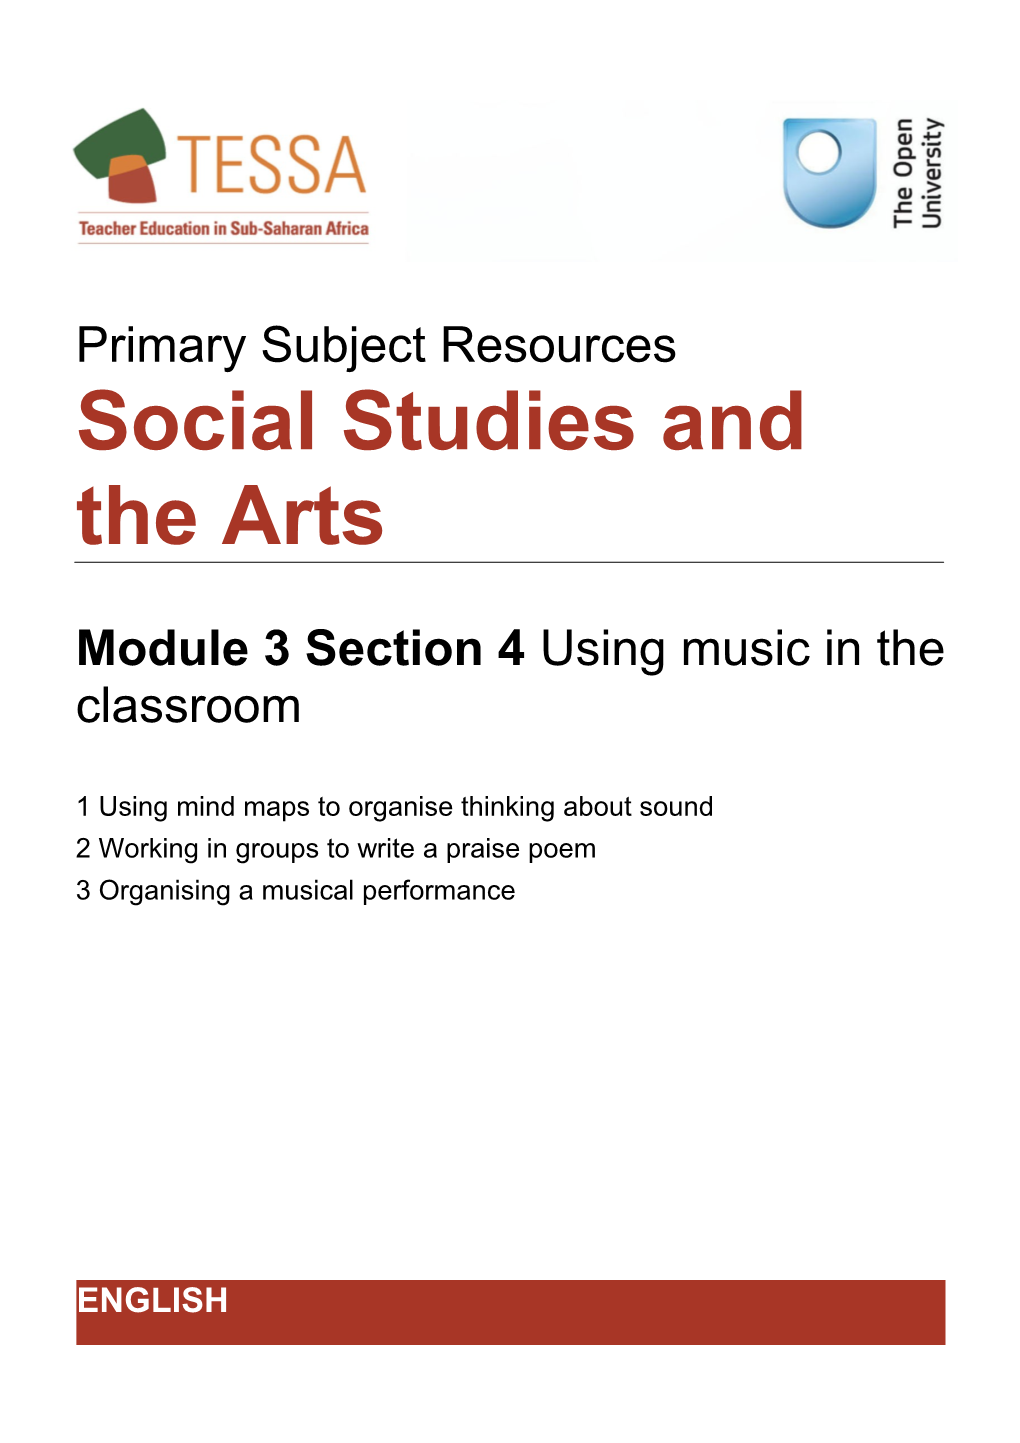 Section 4 : Using Music in the Classroom